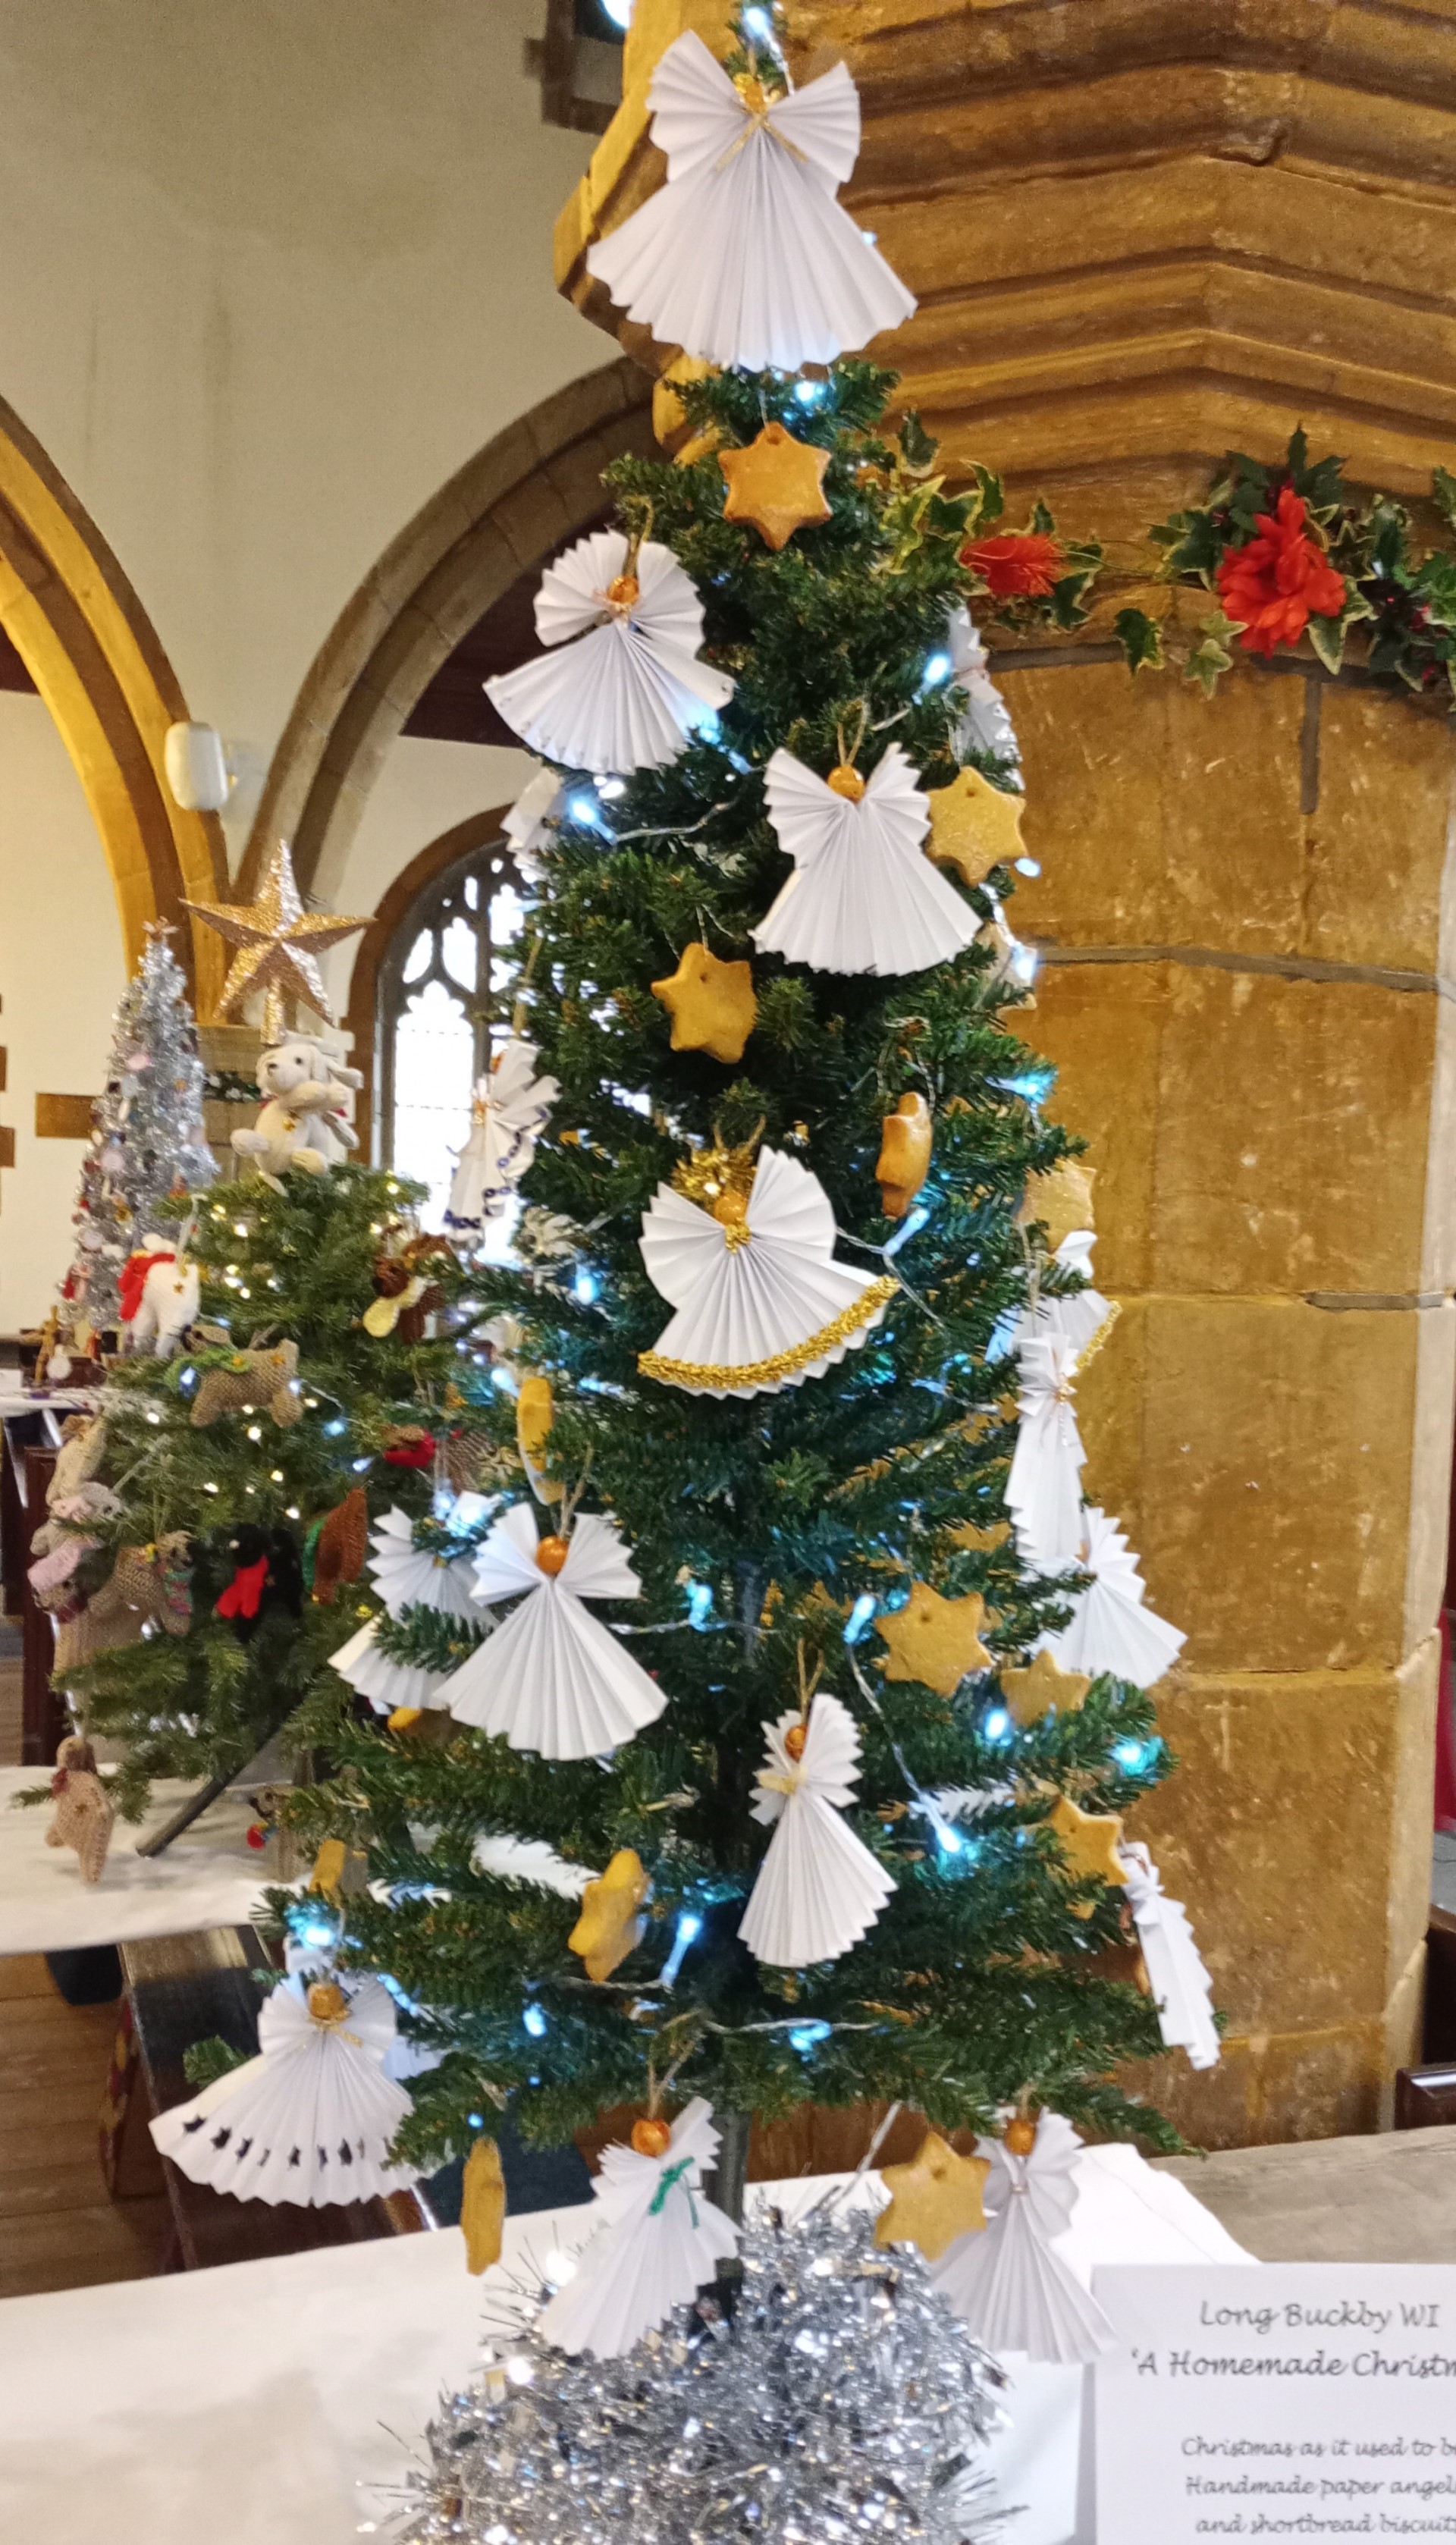 24.03 Paper angels on Christmas tree